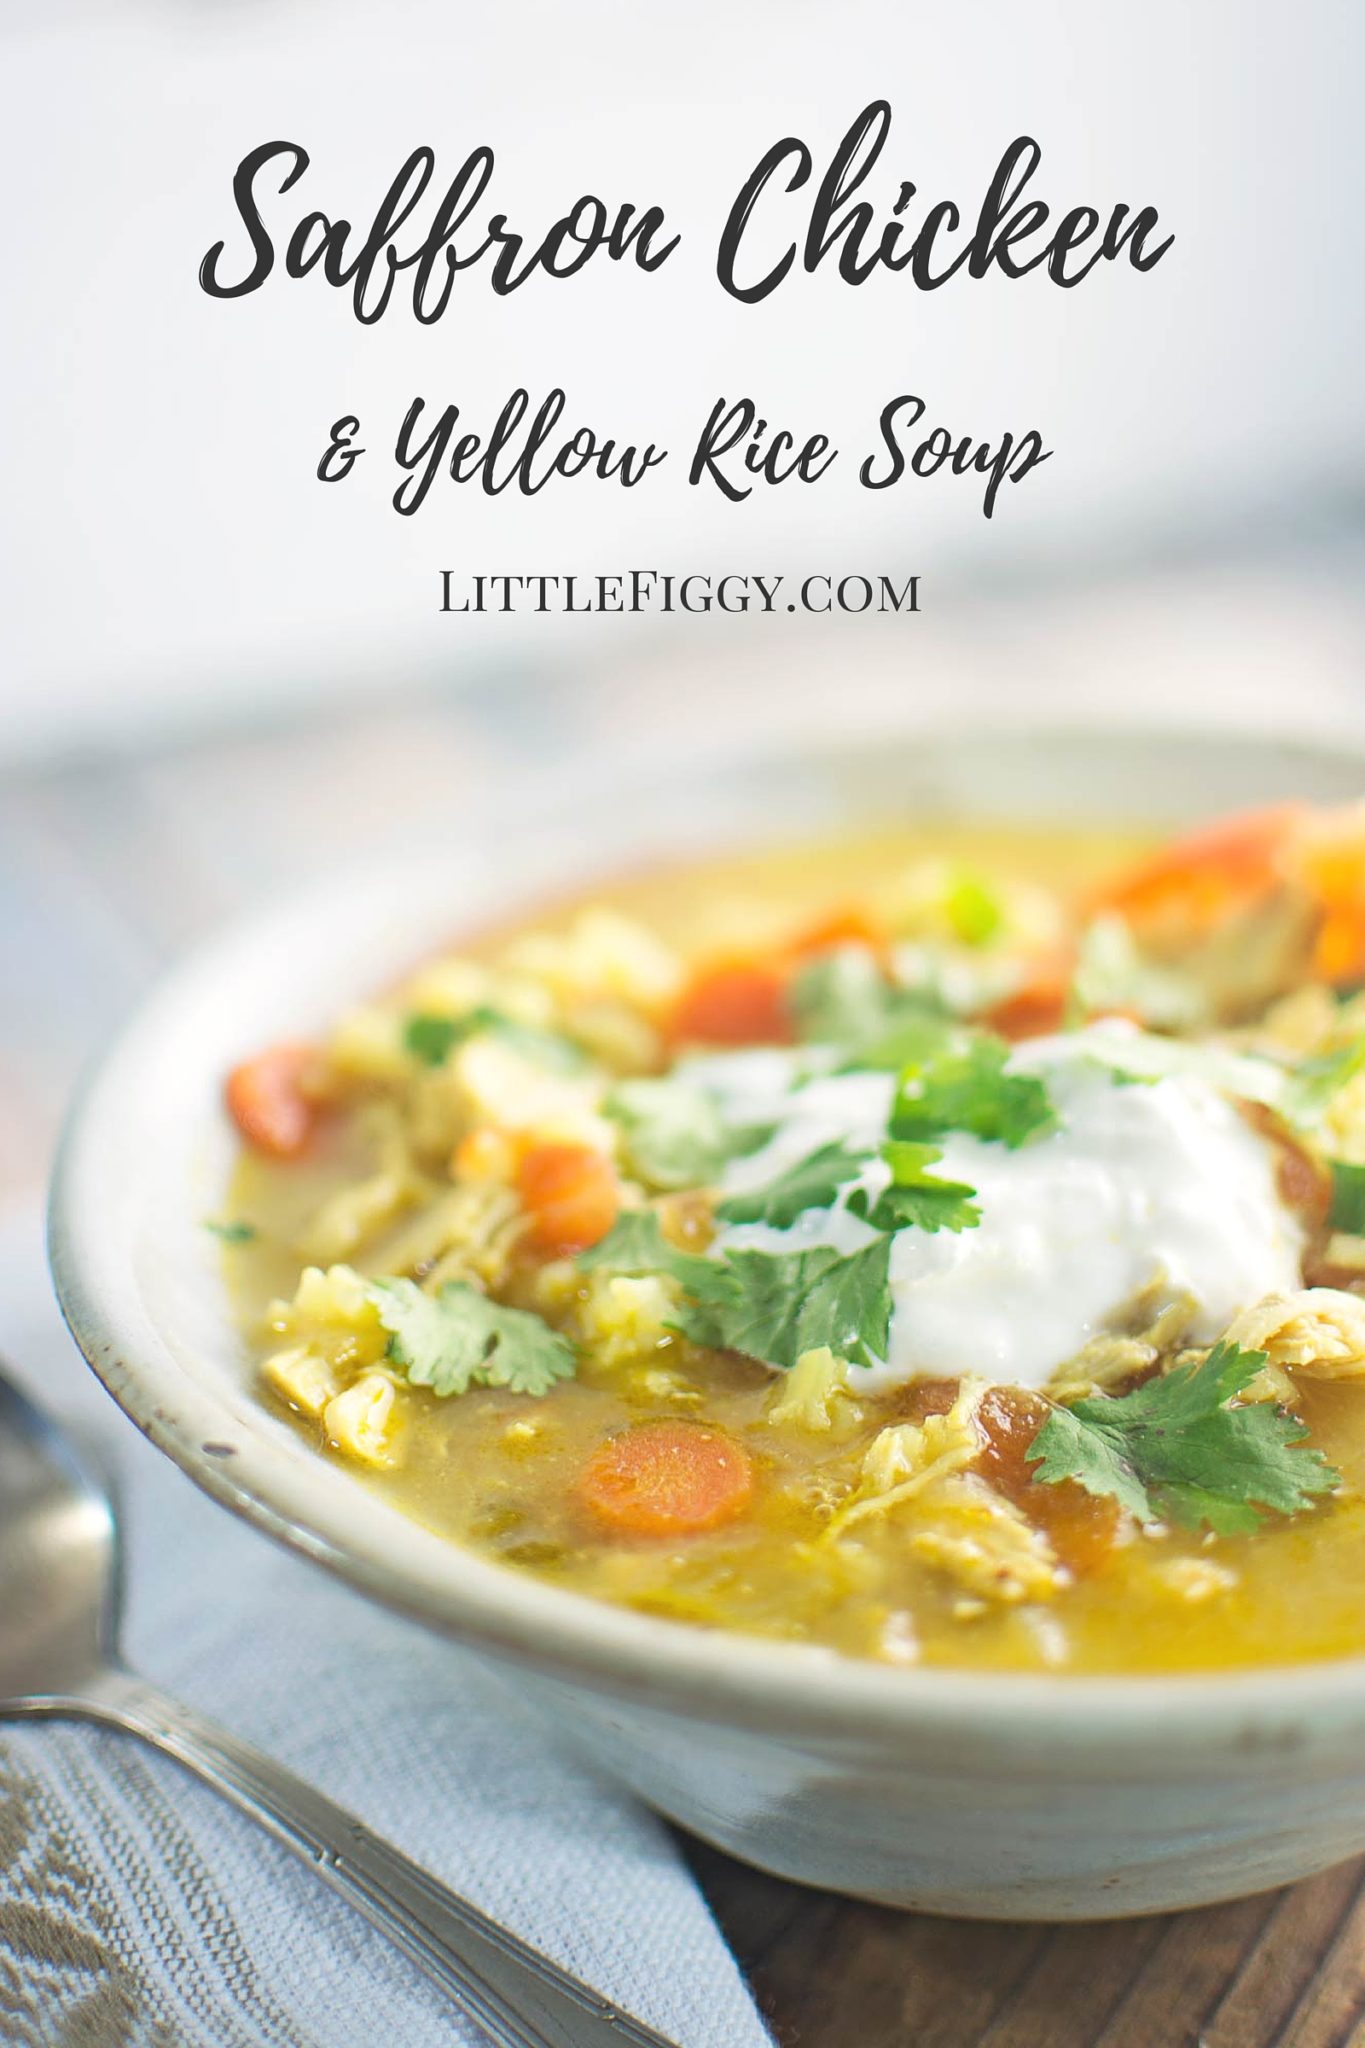 Saffron Chicken & Yellow Rice Soup - this is a great variation on Chicken Soup and is great just because or if you need a 